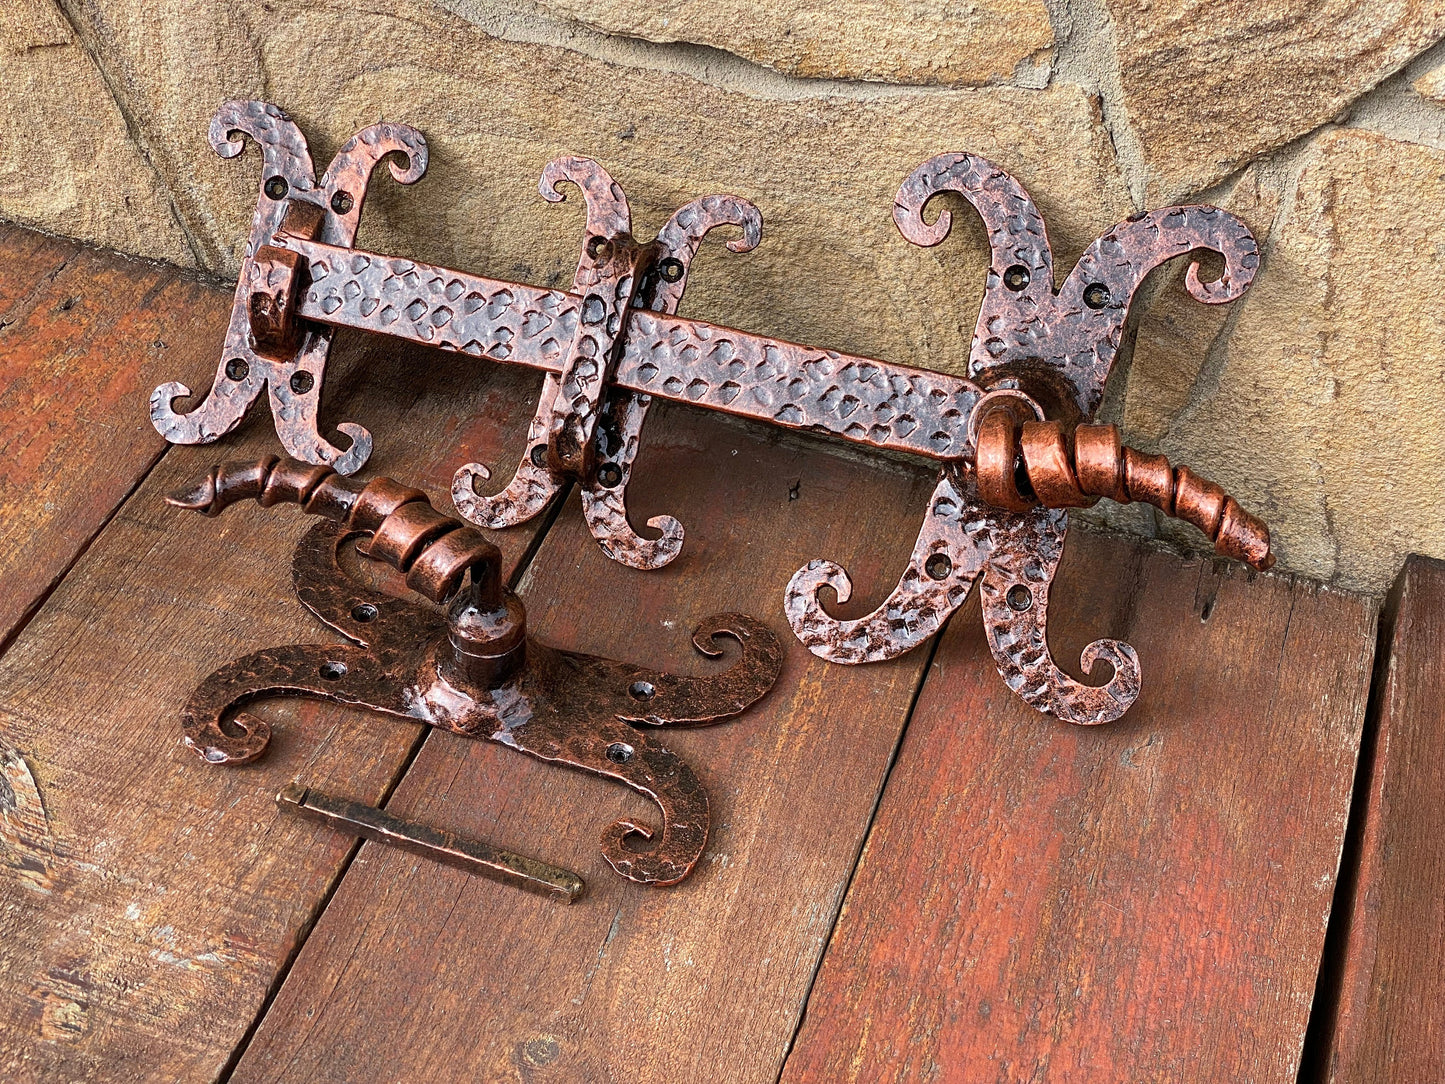 Latch, medieval, gate, door, shed, barn, hinge, Middle Ages, renovation, antique, knight, Christmas, anniversary, birthday, blacksmith, yard